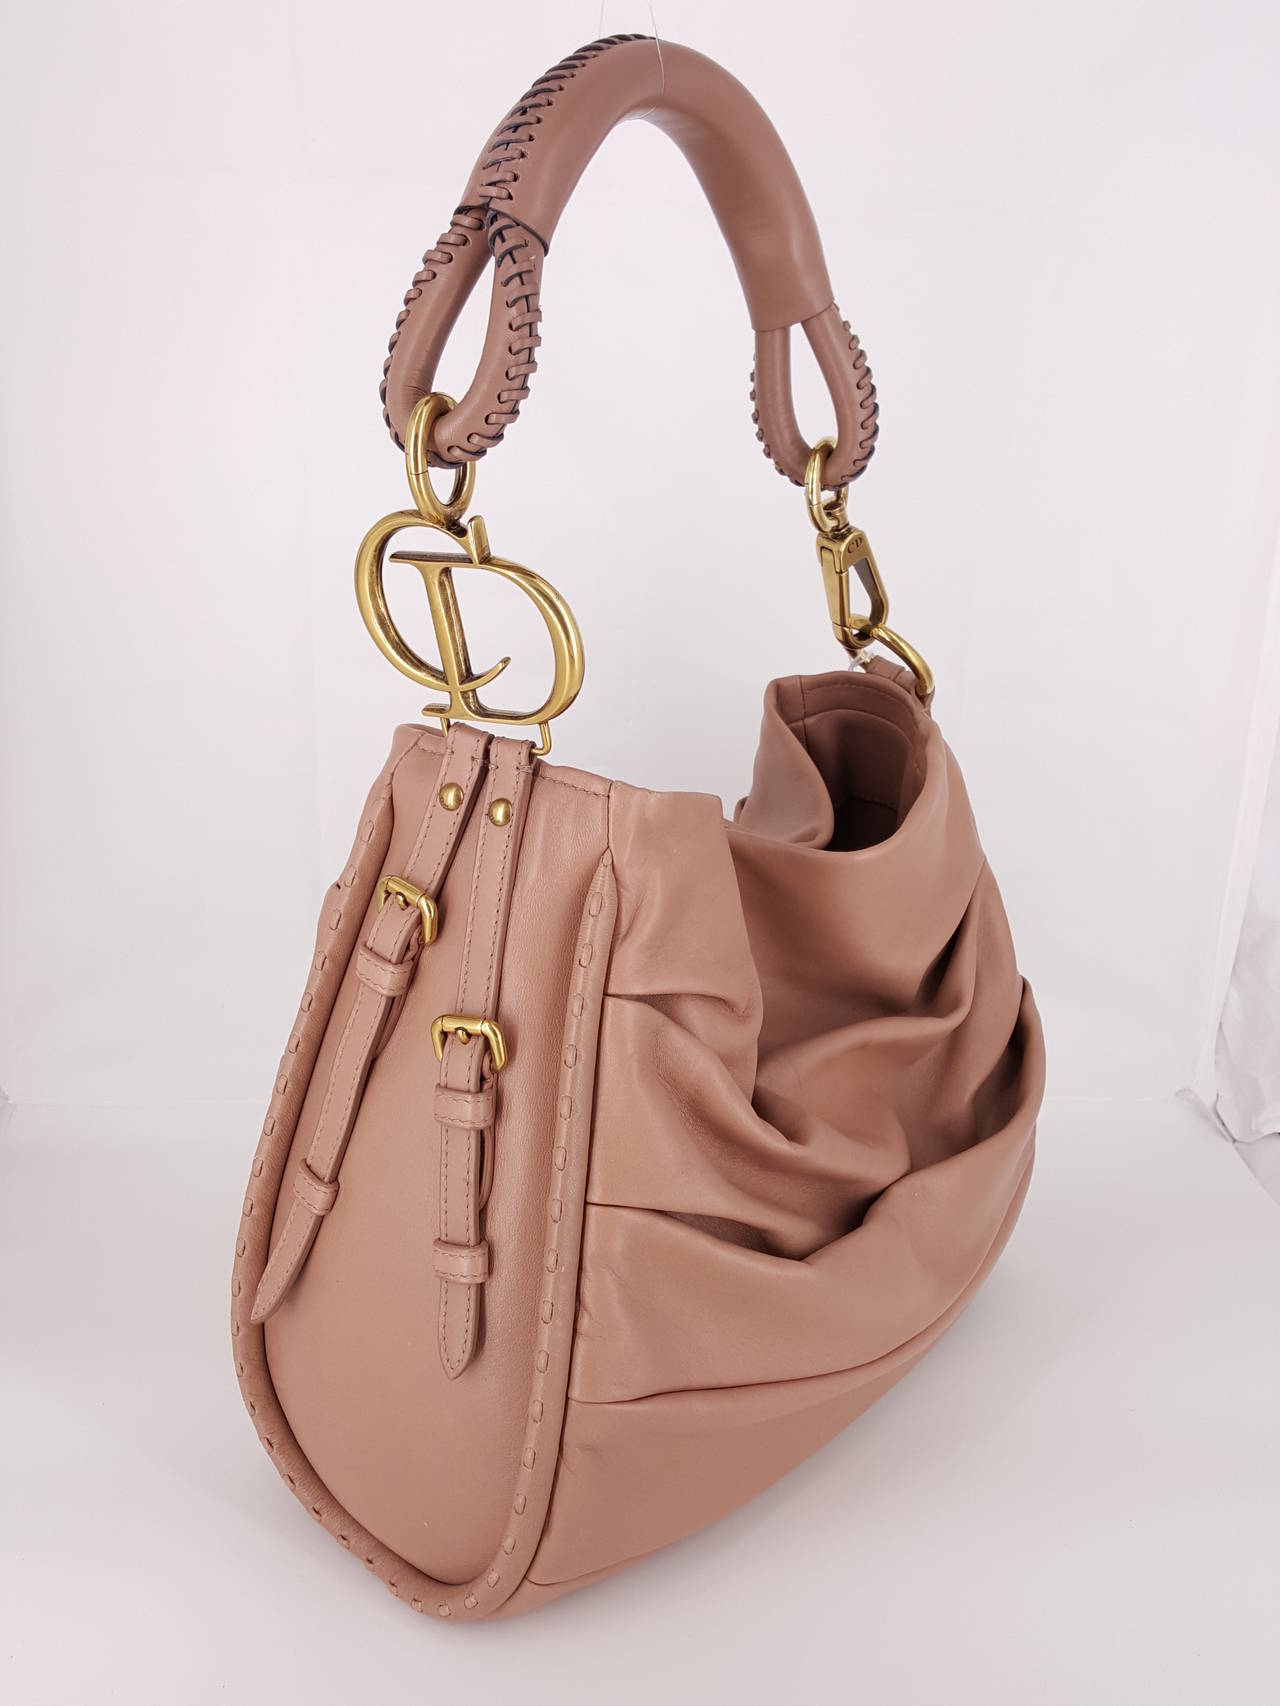 Here is a fabulous, never worn Dior Libertine Hobo.  The leather is soft and supple and the color is a nude.   The detail on the handle is stunning and is accentuated with a large brush gold CD on one side.  This never worn beauty has a timeless